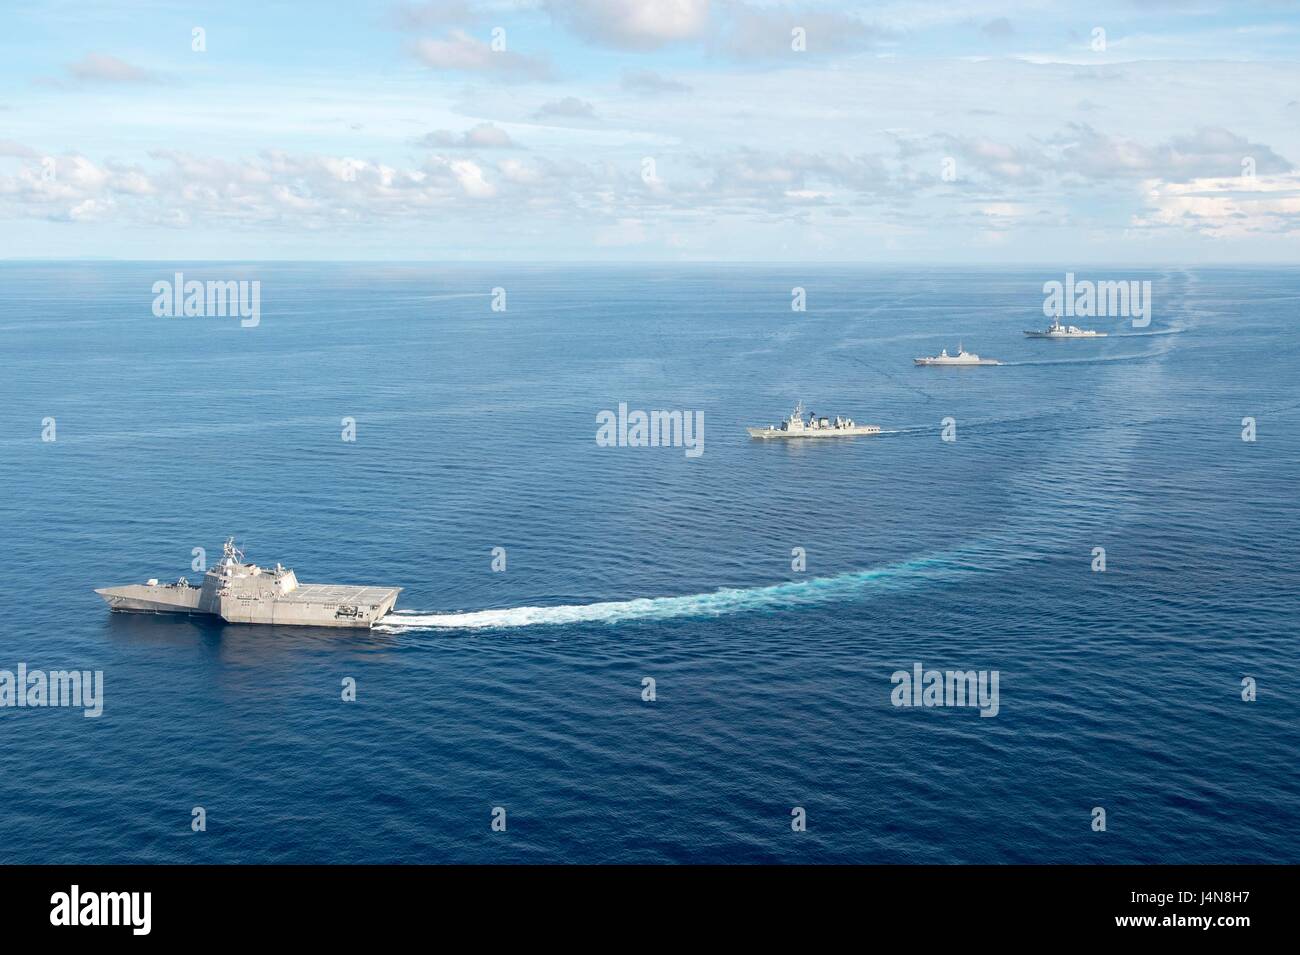 The U.S. Navy littoral combat ship USS Coronado, Republic of Singapore Navy frigate RSS Intrepid, Arleigh Burke-class guided-missile destroyer USS Sterett and the Royal Thai Navy frigate HTMS Naresuan during divisional tactics as part of the multilateral Cooperation Afloat Readiness and Training May 11, 2017 in the South China Sea. Stock Photo